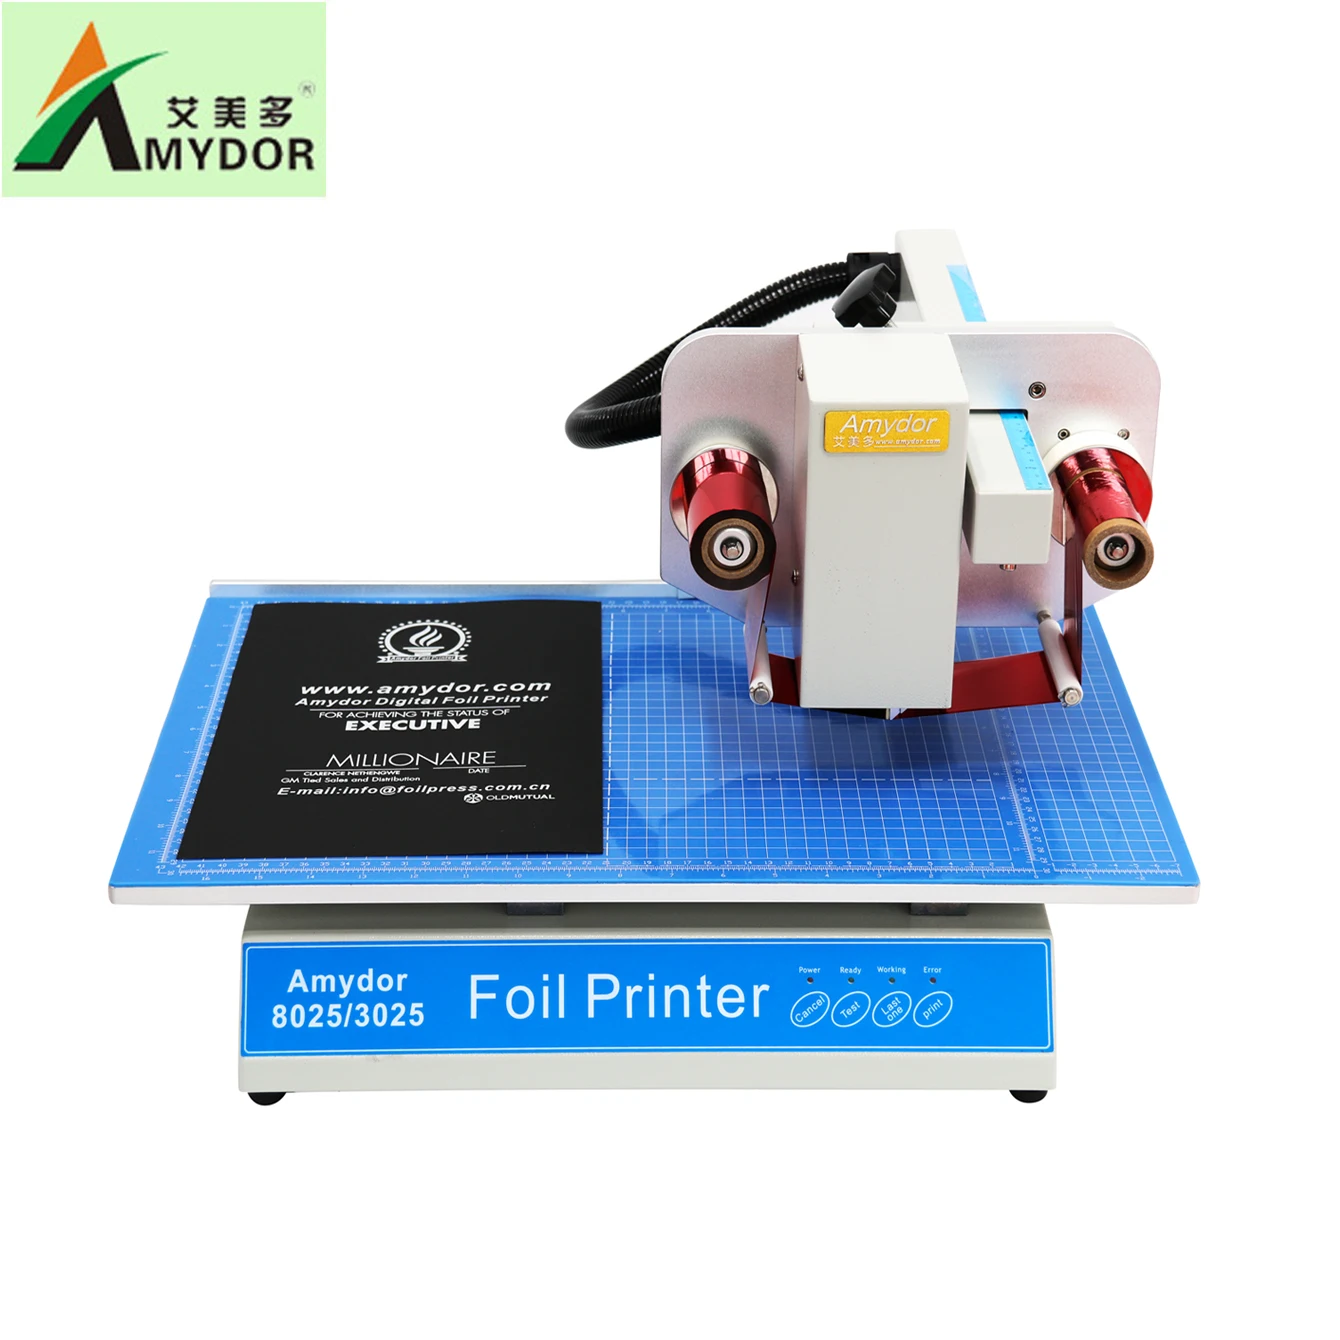 

Amydor AMD8025 digital flatbed printer, foil press machine, foil stamping and gold printing on leather book thesis cover price